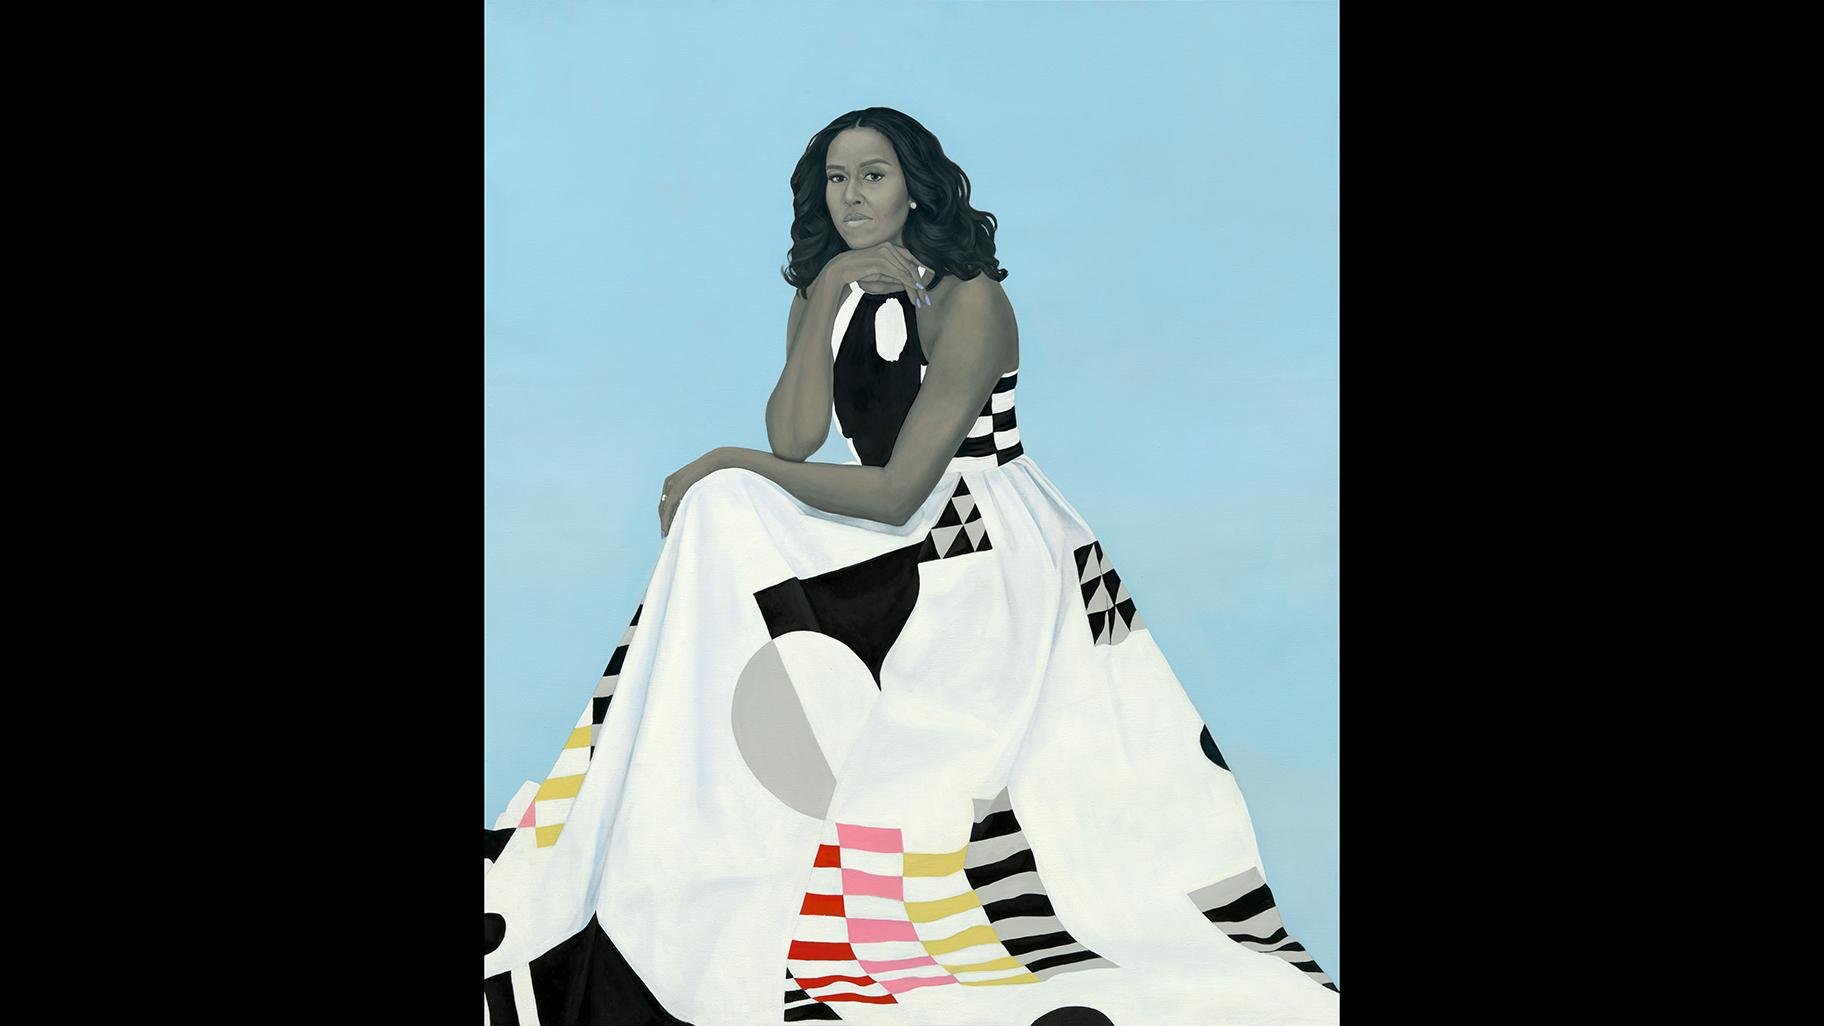 Amy Sherald. “Michelle LaVaughn Robinson Obama,” 2018. Oil on linen. National Portrait Gallery, Smithsonian Institution. The National Portrait Gallery is grateful to the following lead donors for their support of the Obama portraits: Kate Capshaw and Steven Spielberg; Judith Kern and Kent Whealy; Tommie L. Pegues and Donald A. Capoccia.Courtesy of the Smithsonian’s National Portrait Gallery.